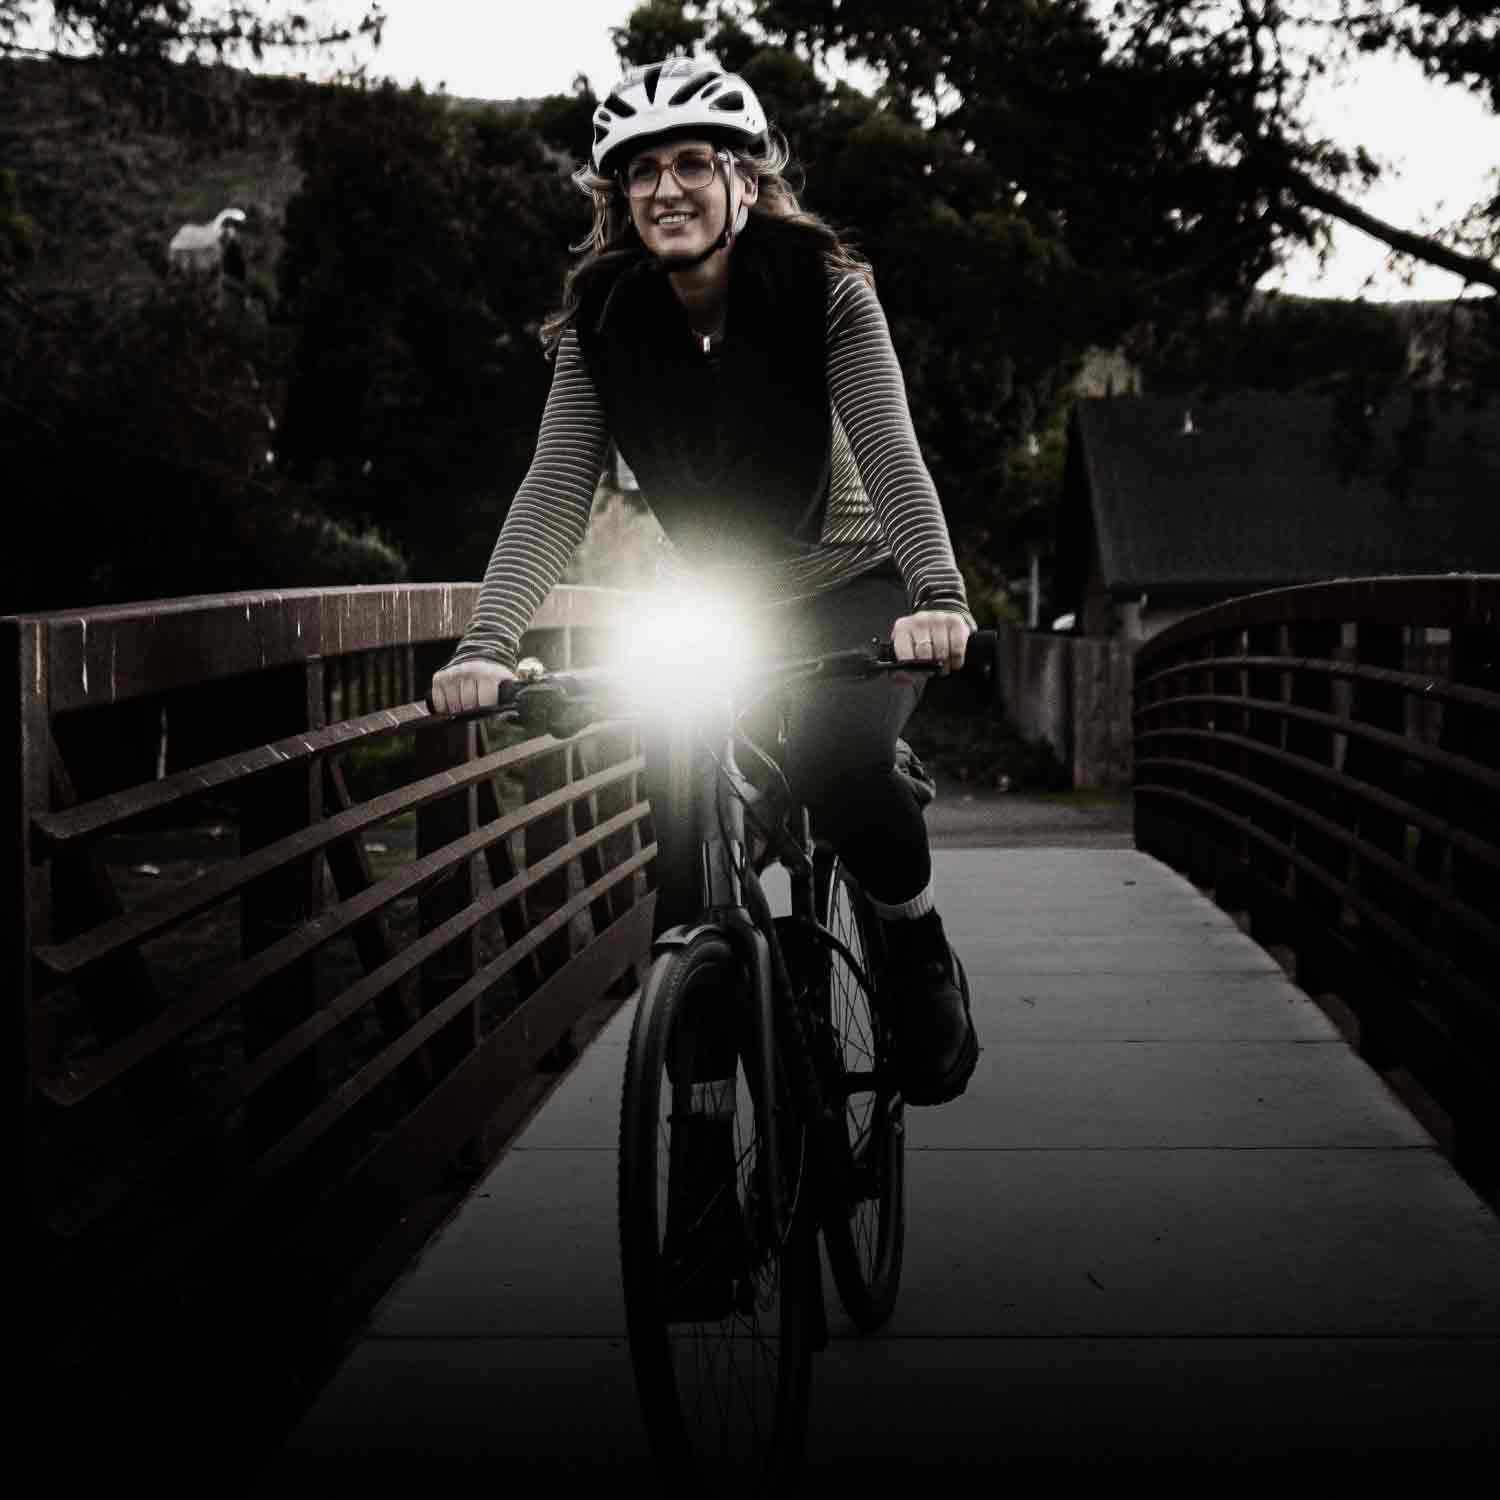 A woman crossing a bridge on a bicycle with a bright light mounted on the handlebars.